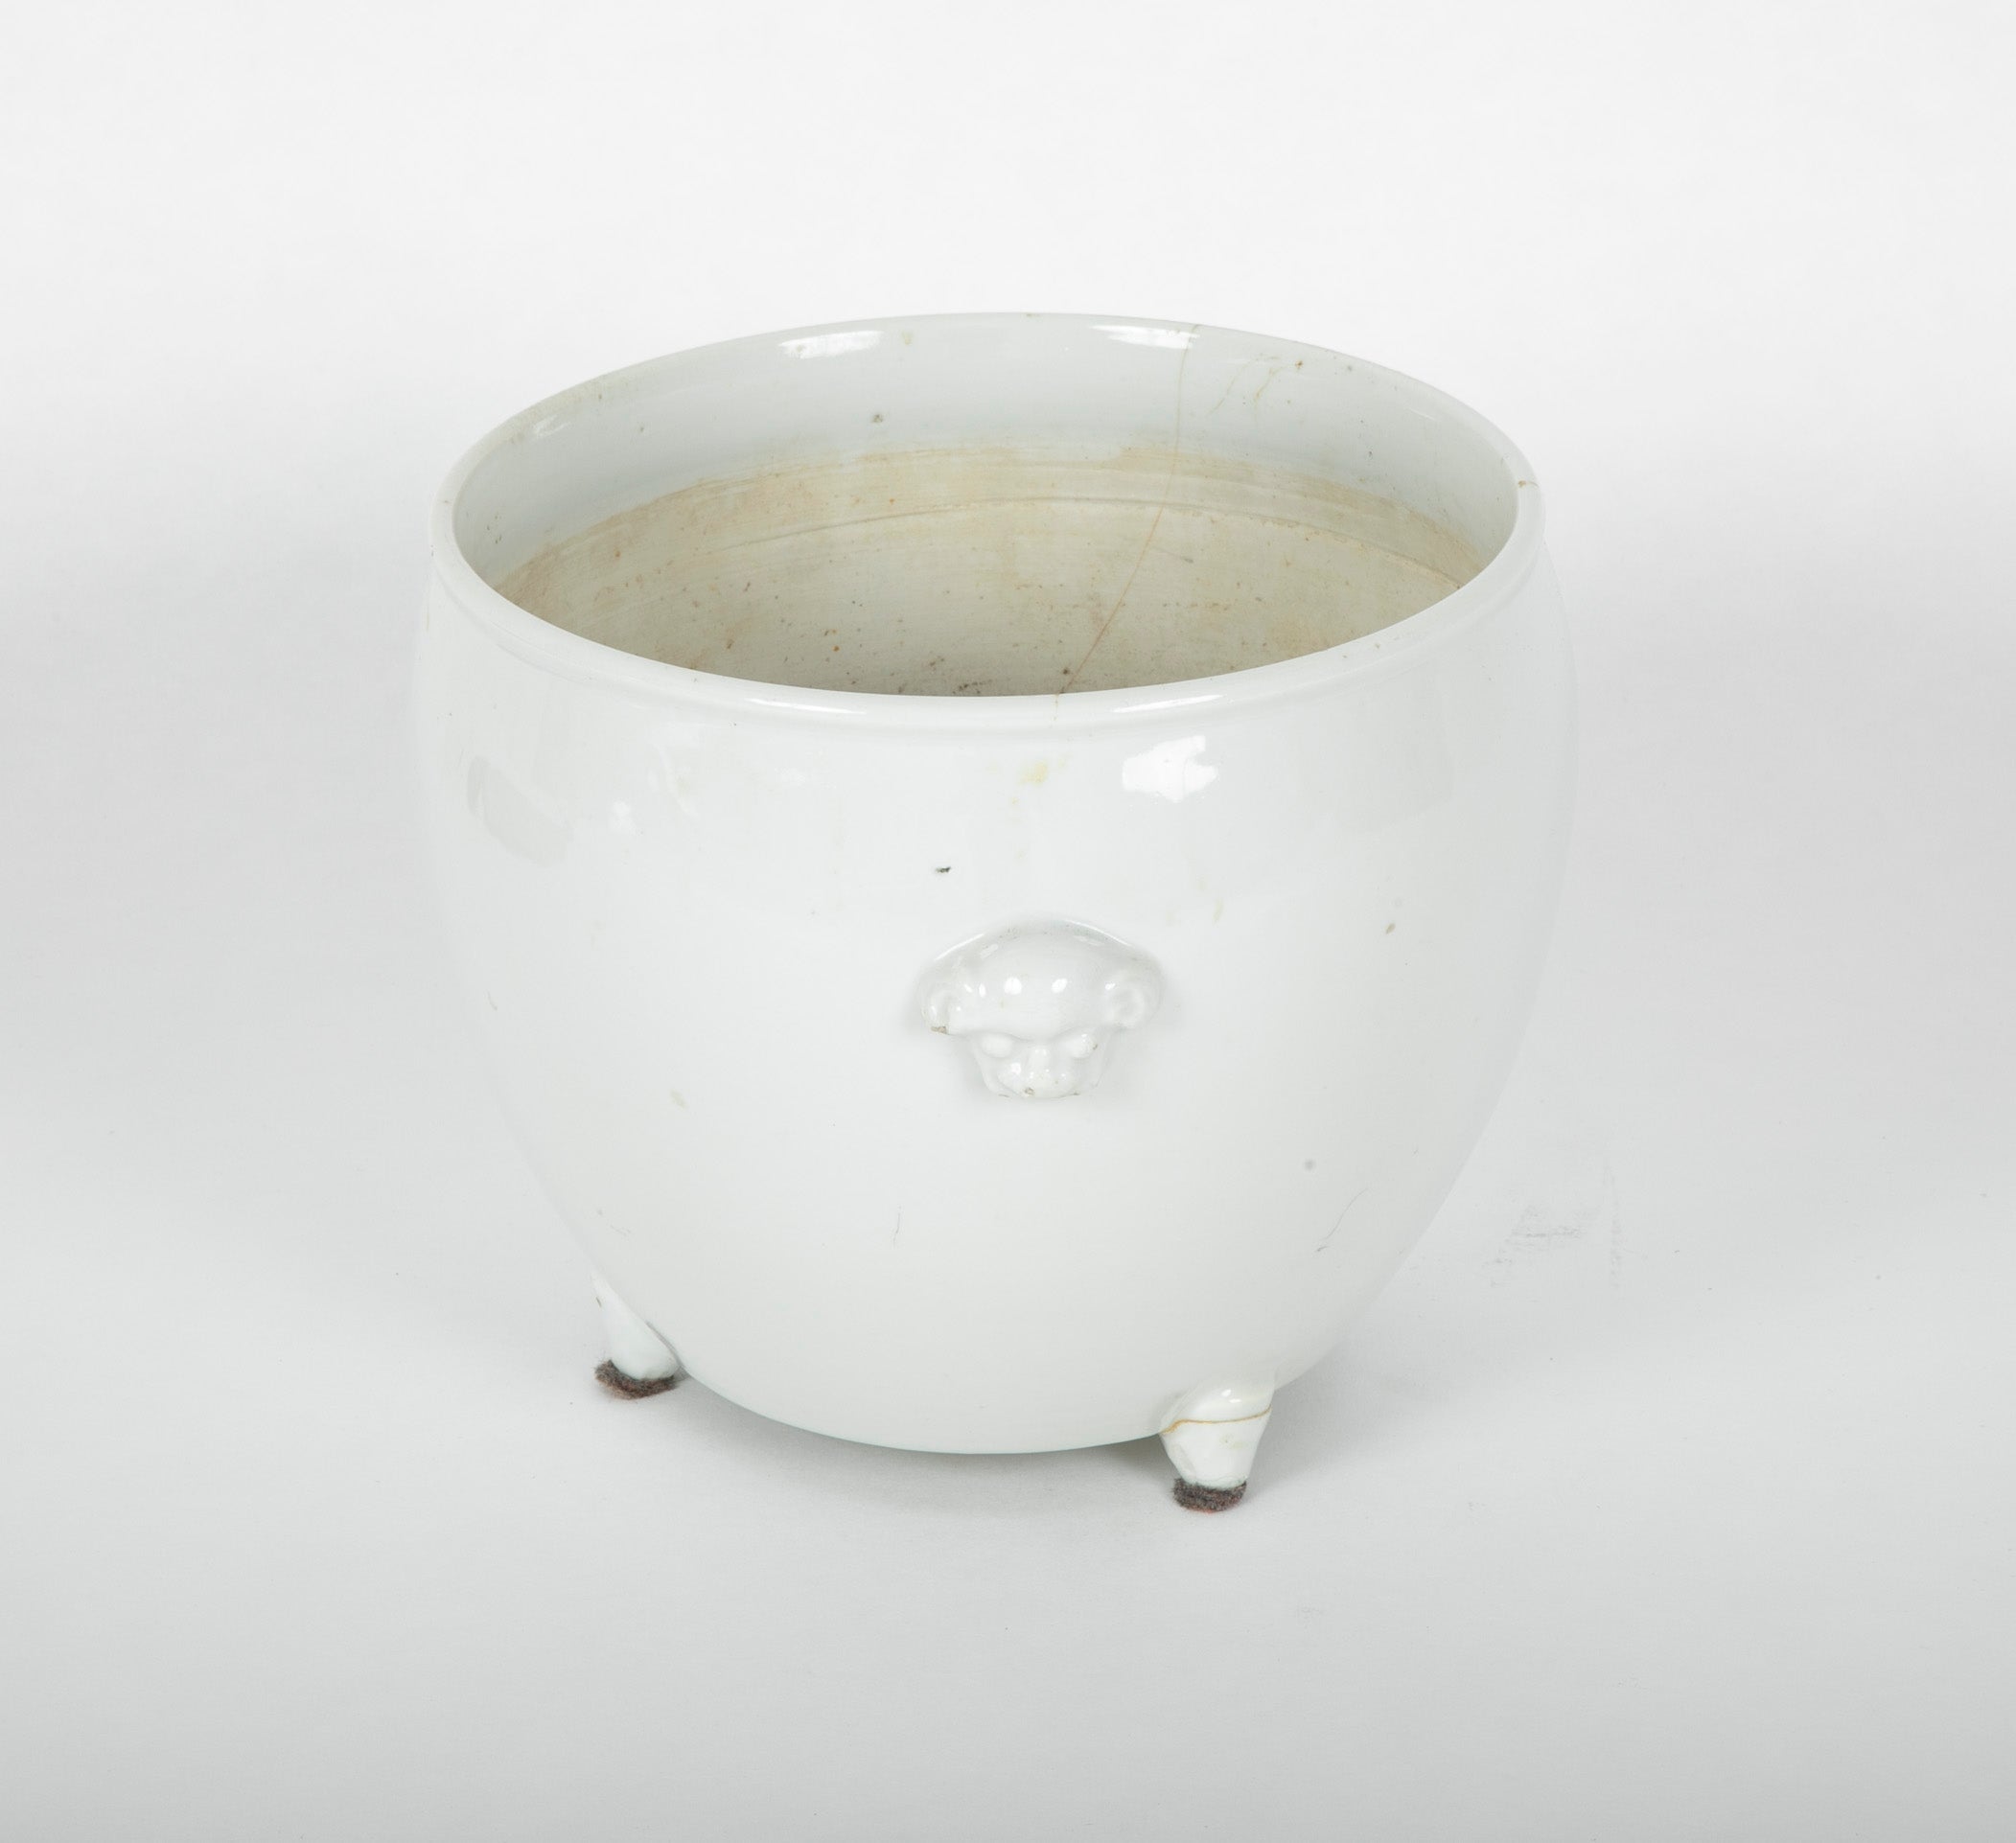 Chinese Porcelain Footed Bowl